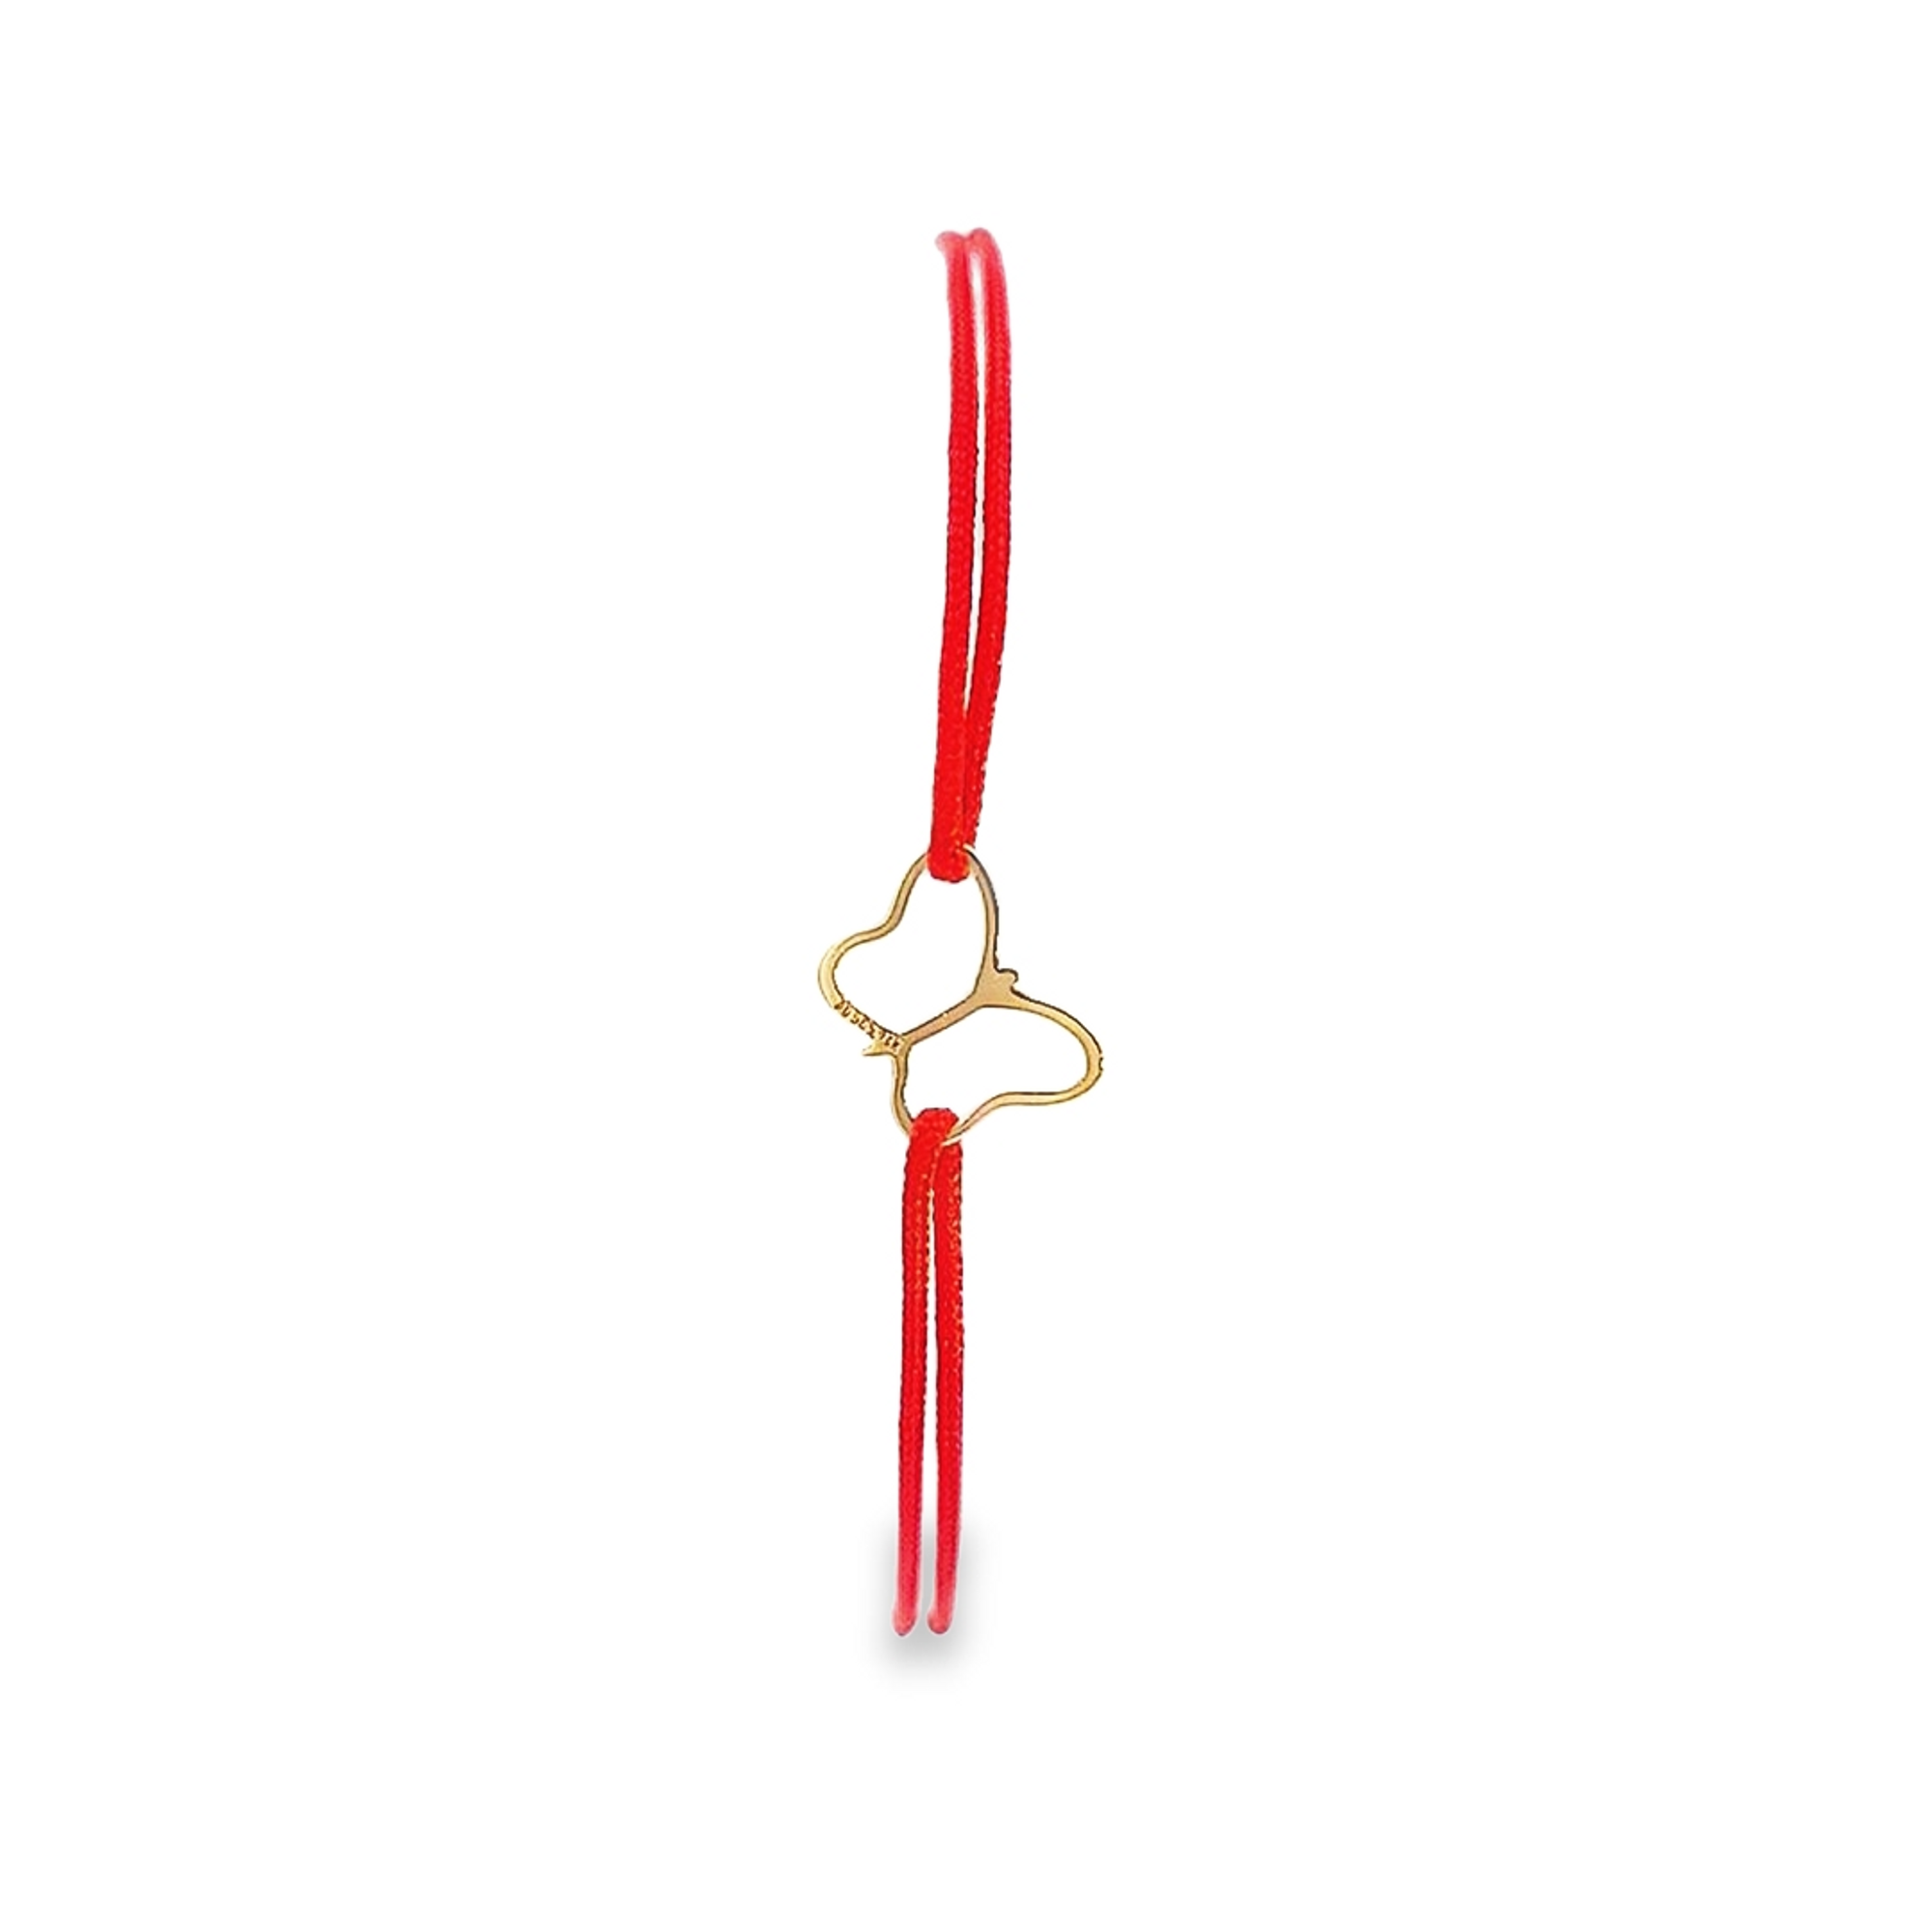 Solid Gold 14k Butterfly Charm on Red String Bracelet – Magpie Gems handmade in Ireland.